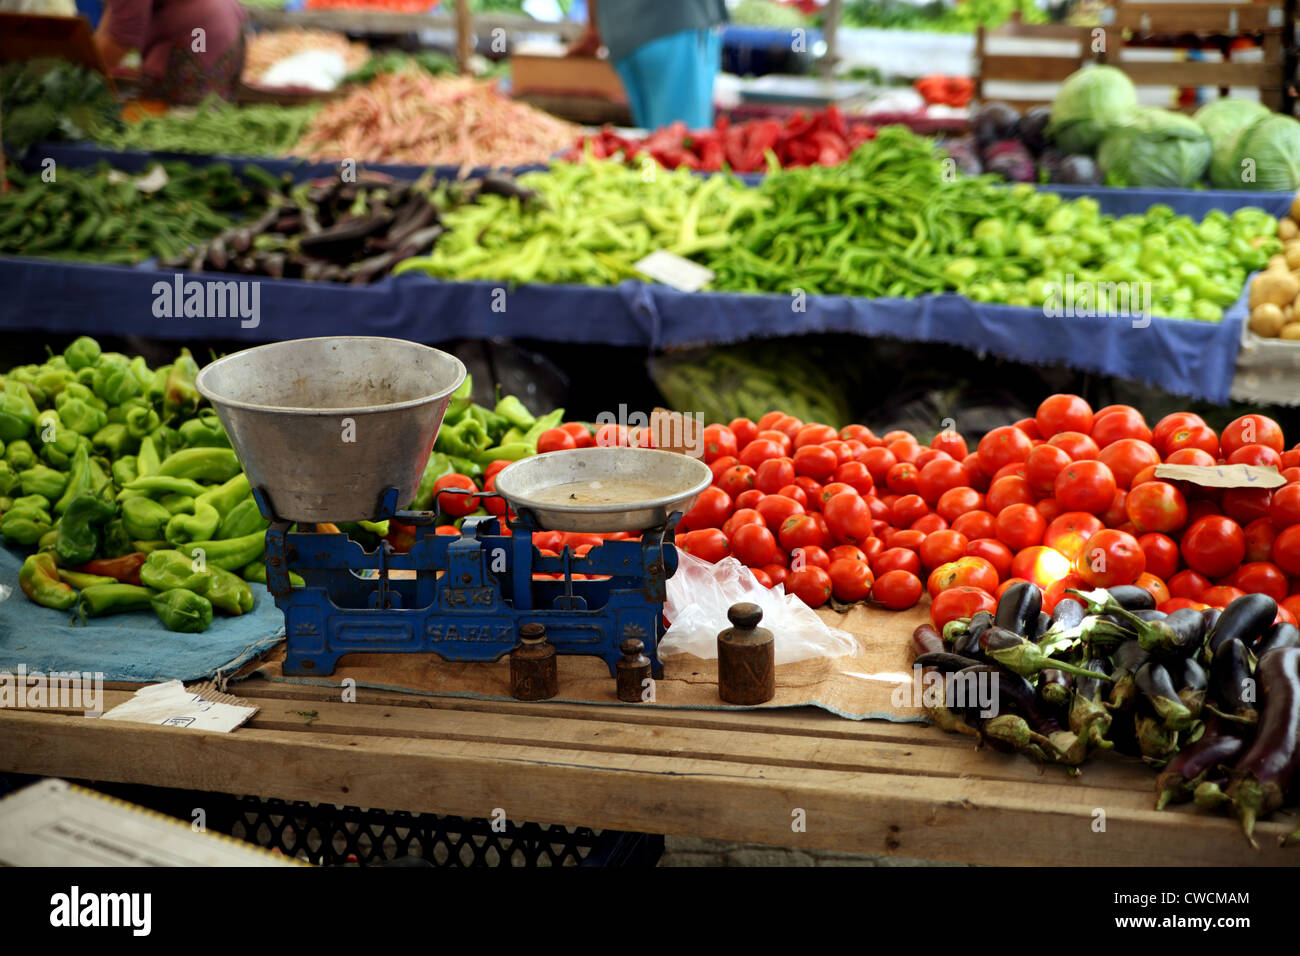 View of Turkish market in Koycegiz, a town near Dalyan, Turkey with scales in foreground with vegetables Stock Photo